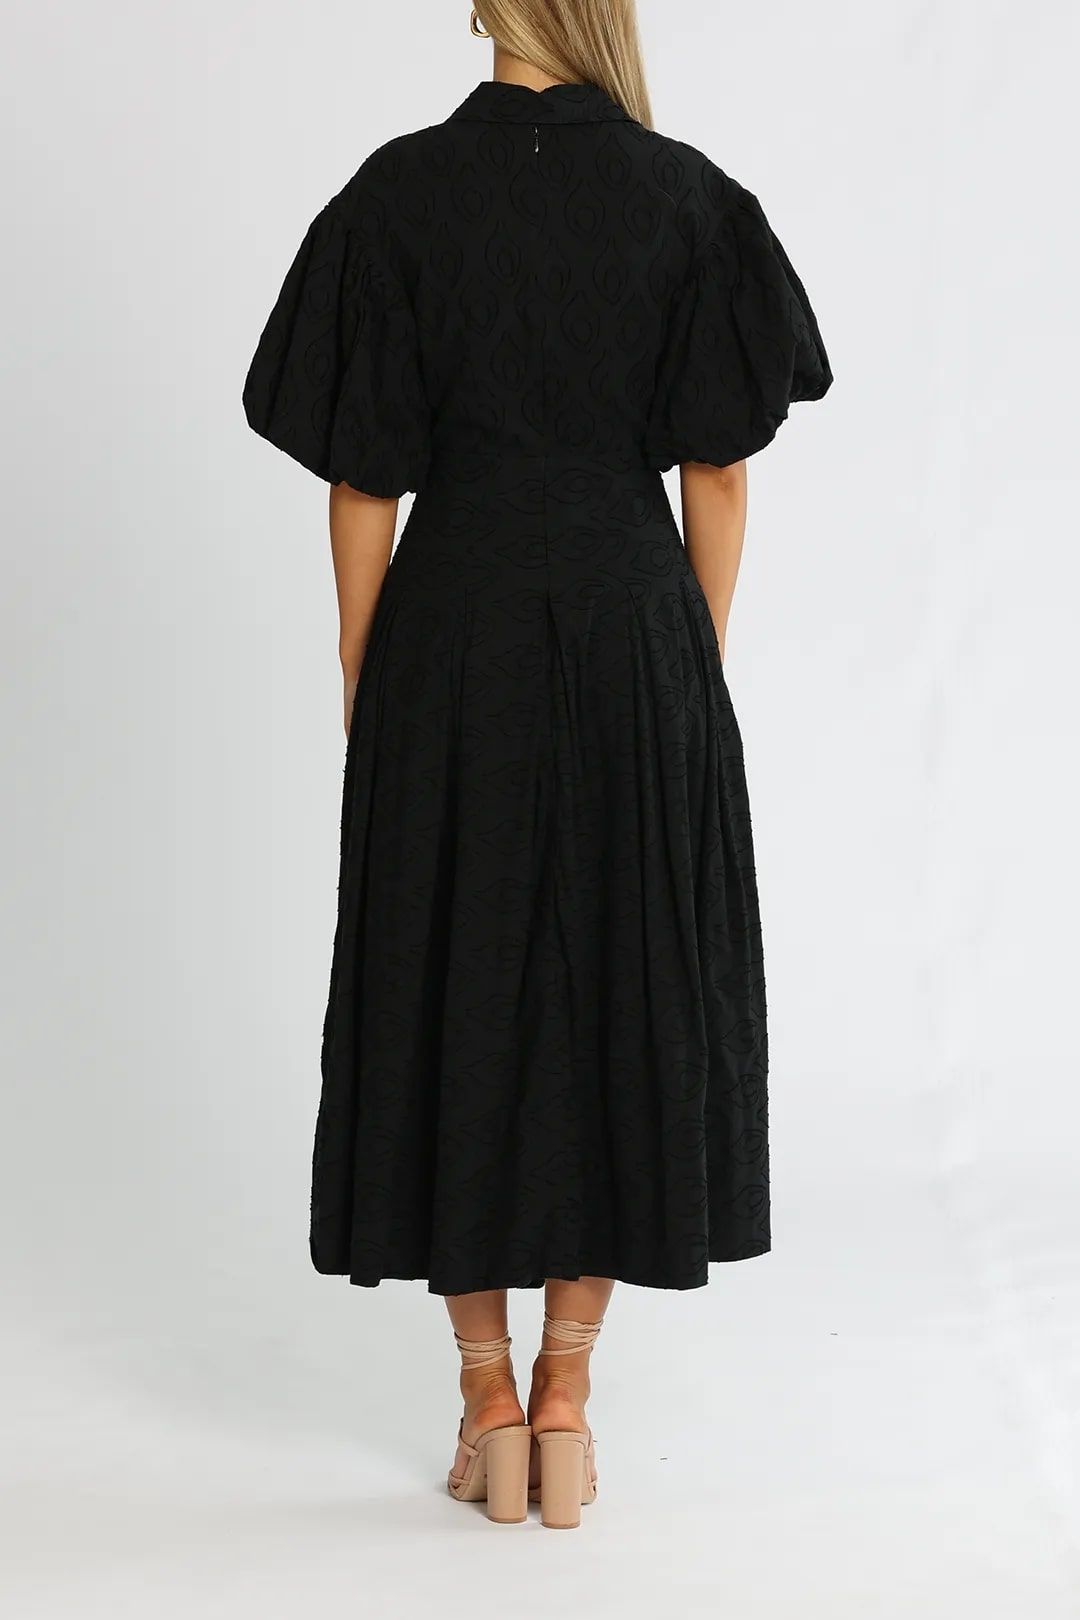 Grange dress in black for cocktail parties.